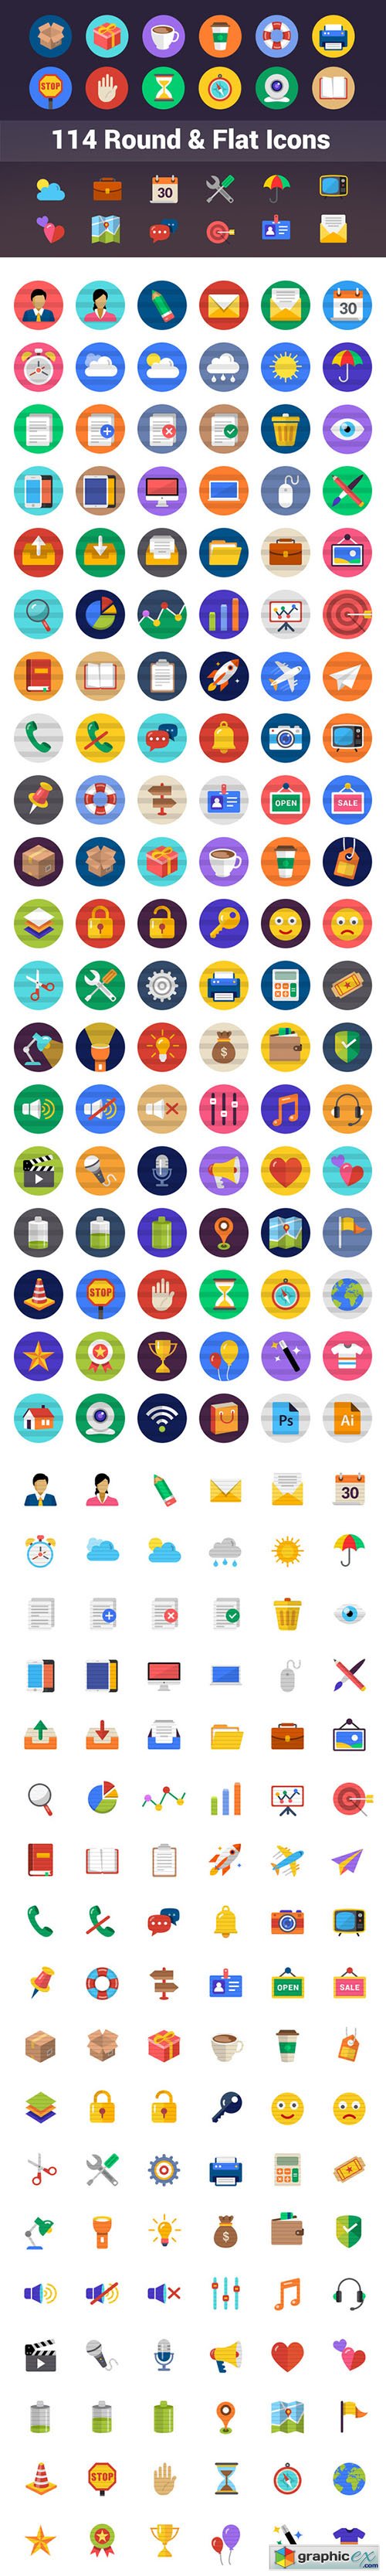 114 Round And Flat Icons